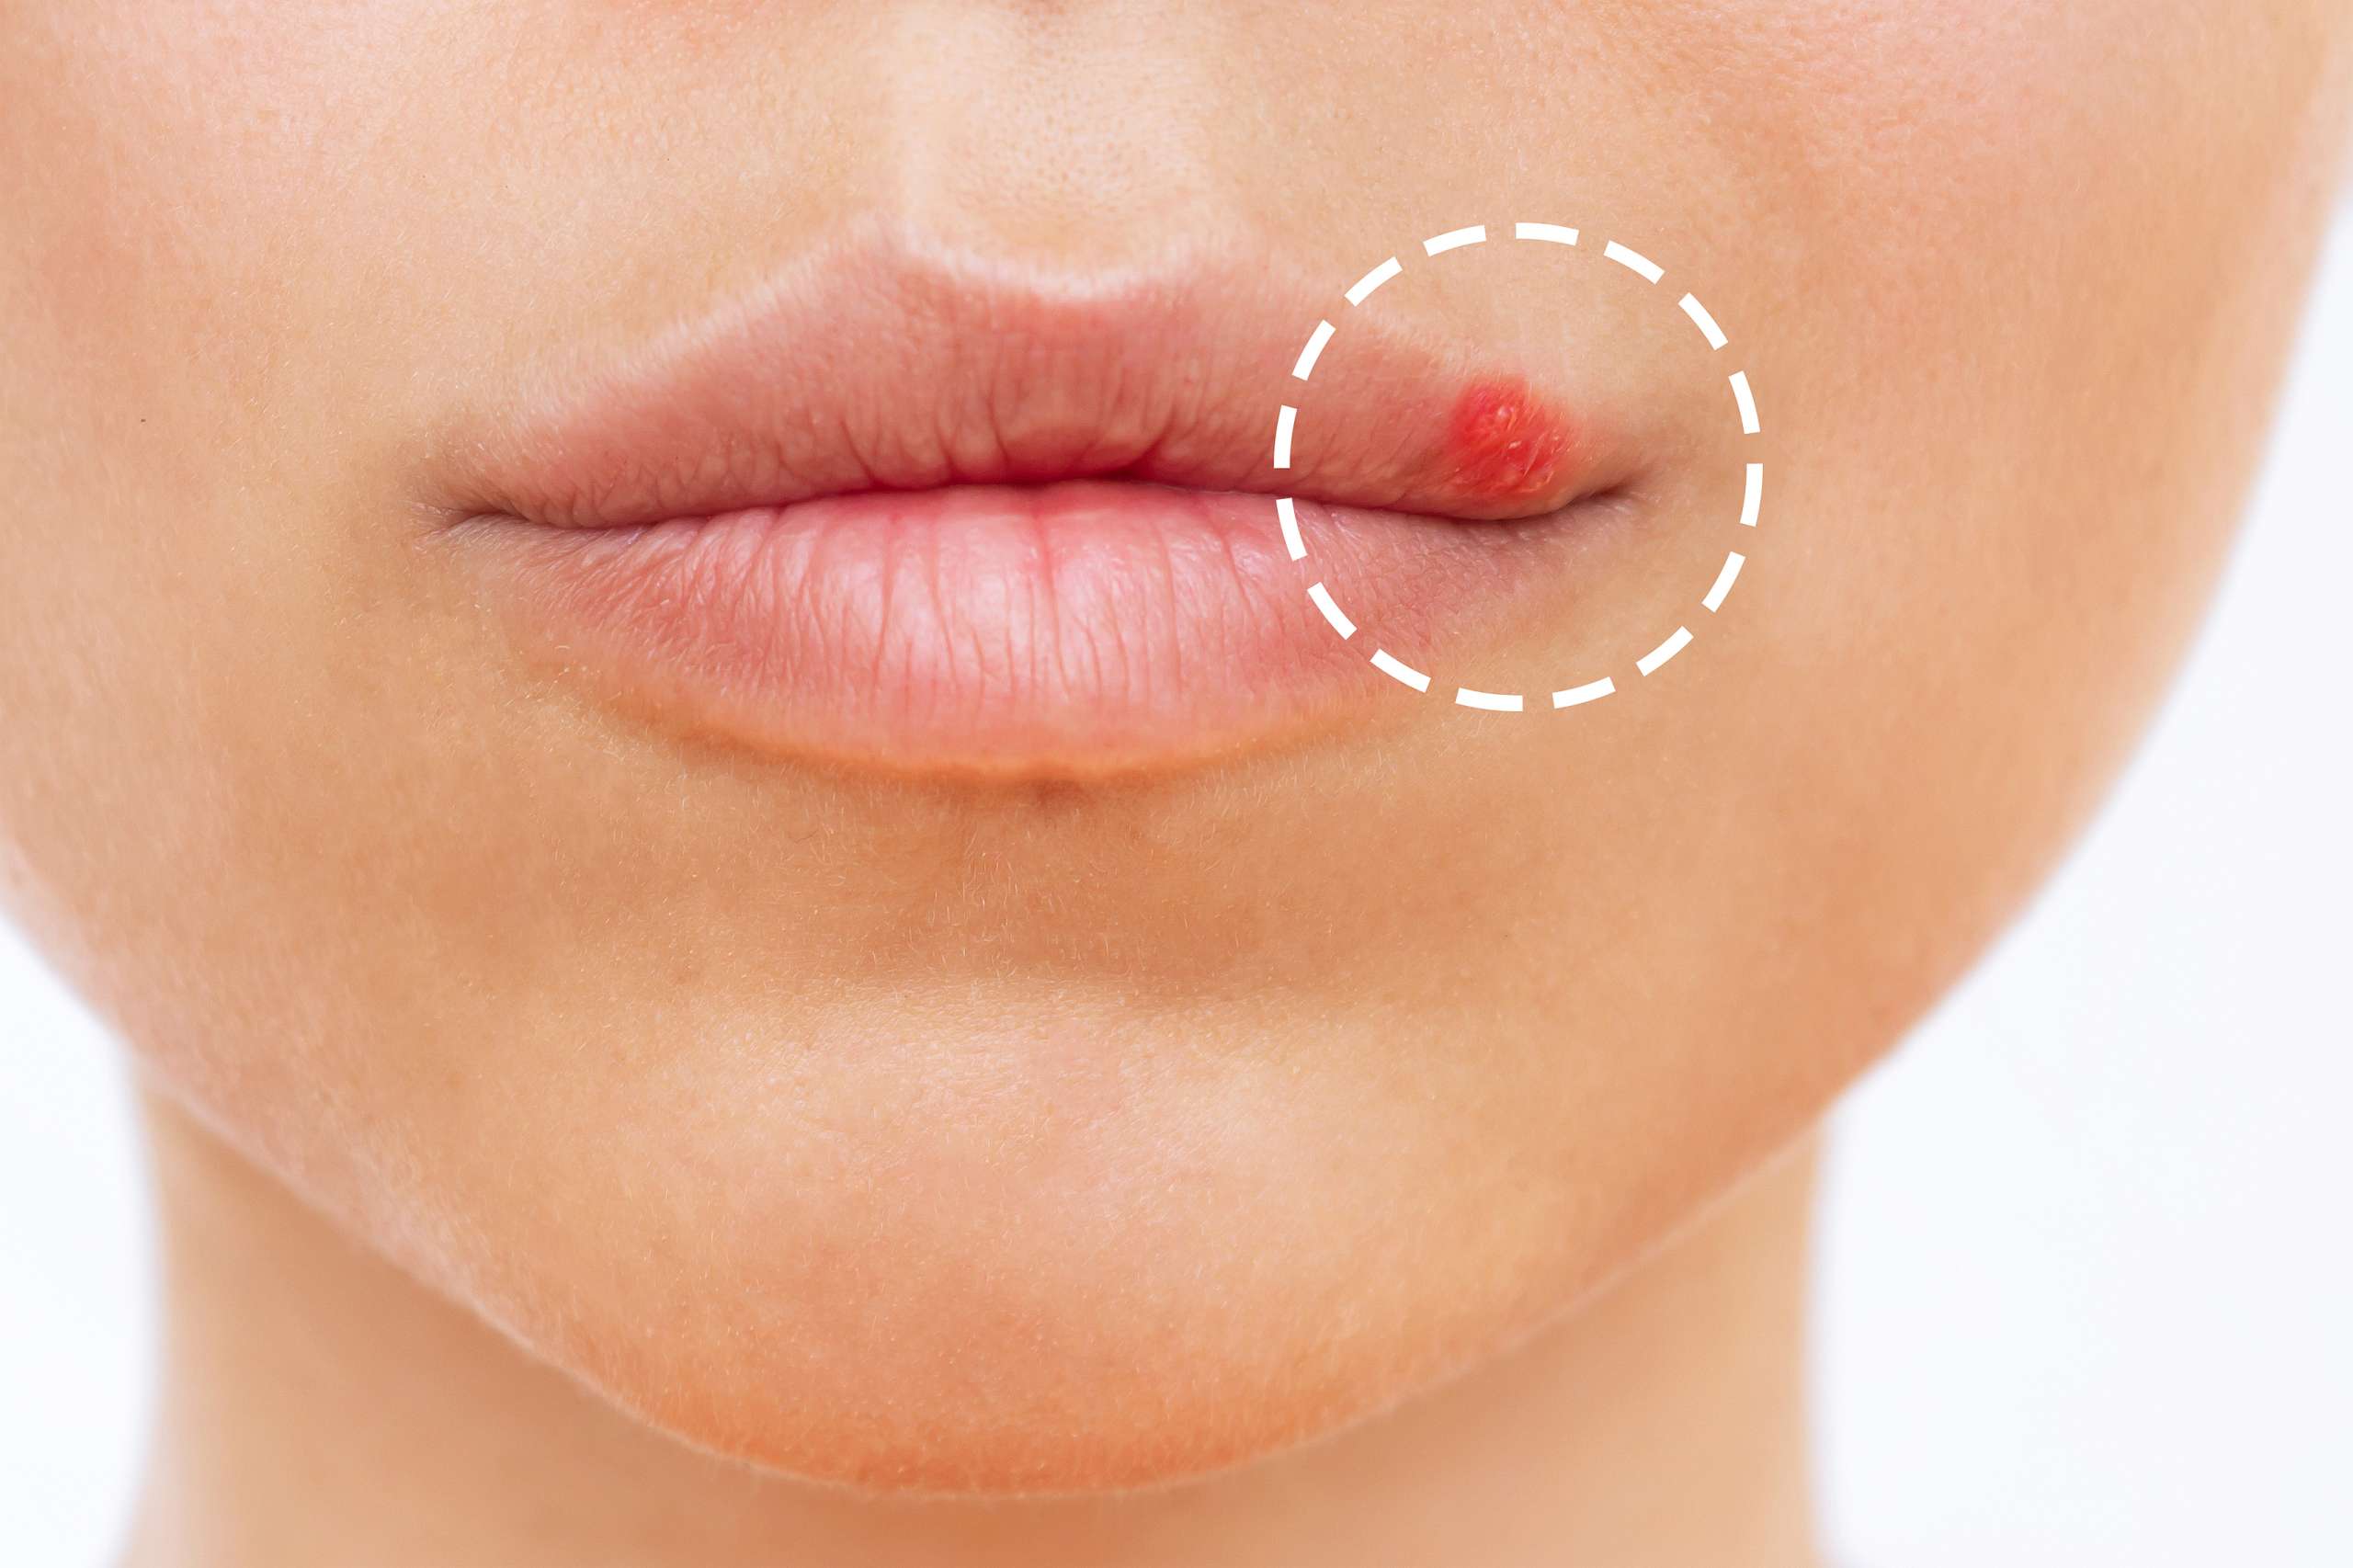 Herpes on the lip. Blisters on the mouth of a young woman-Herpes Simplex Virus 